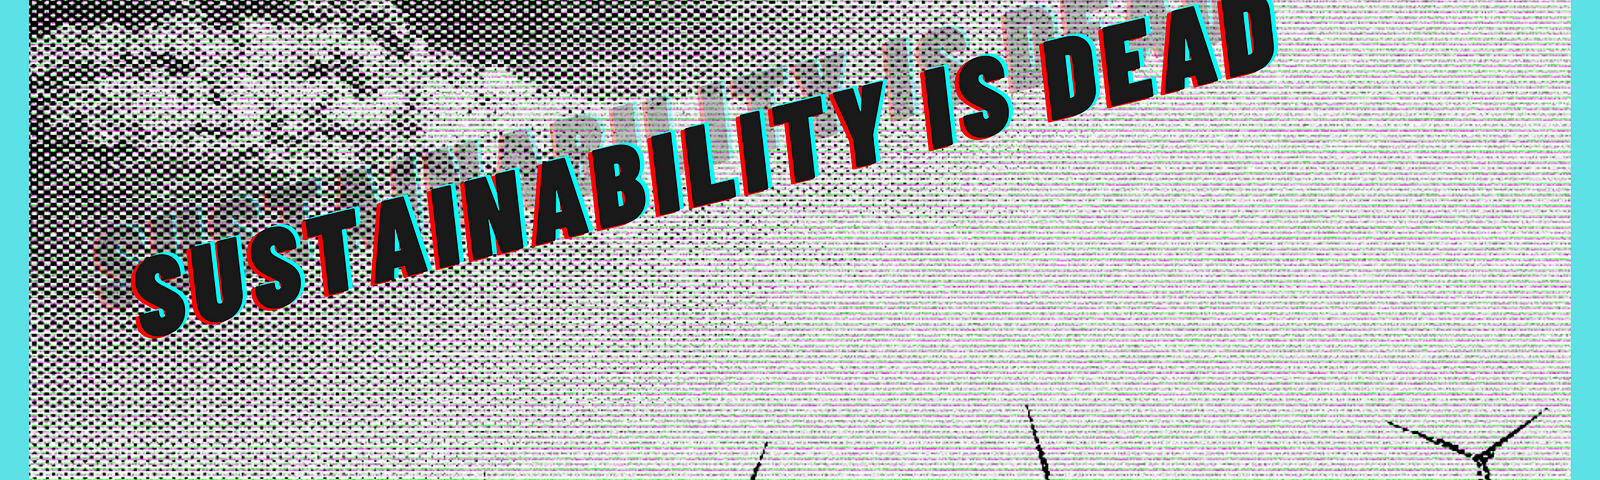 The words ‘sustainability is dead’ are overlayed on top of windmills and trees. The image has a grainy, retro filter applied.